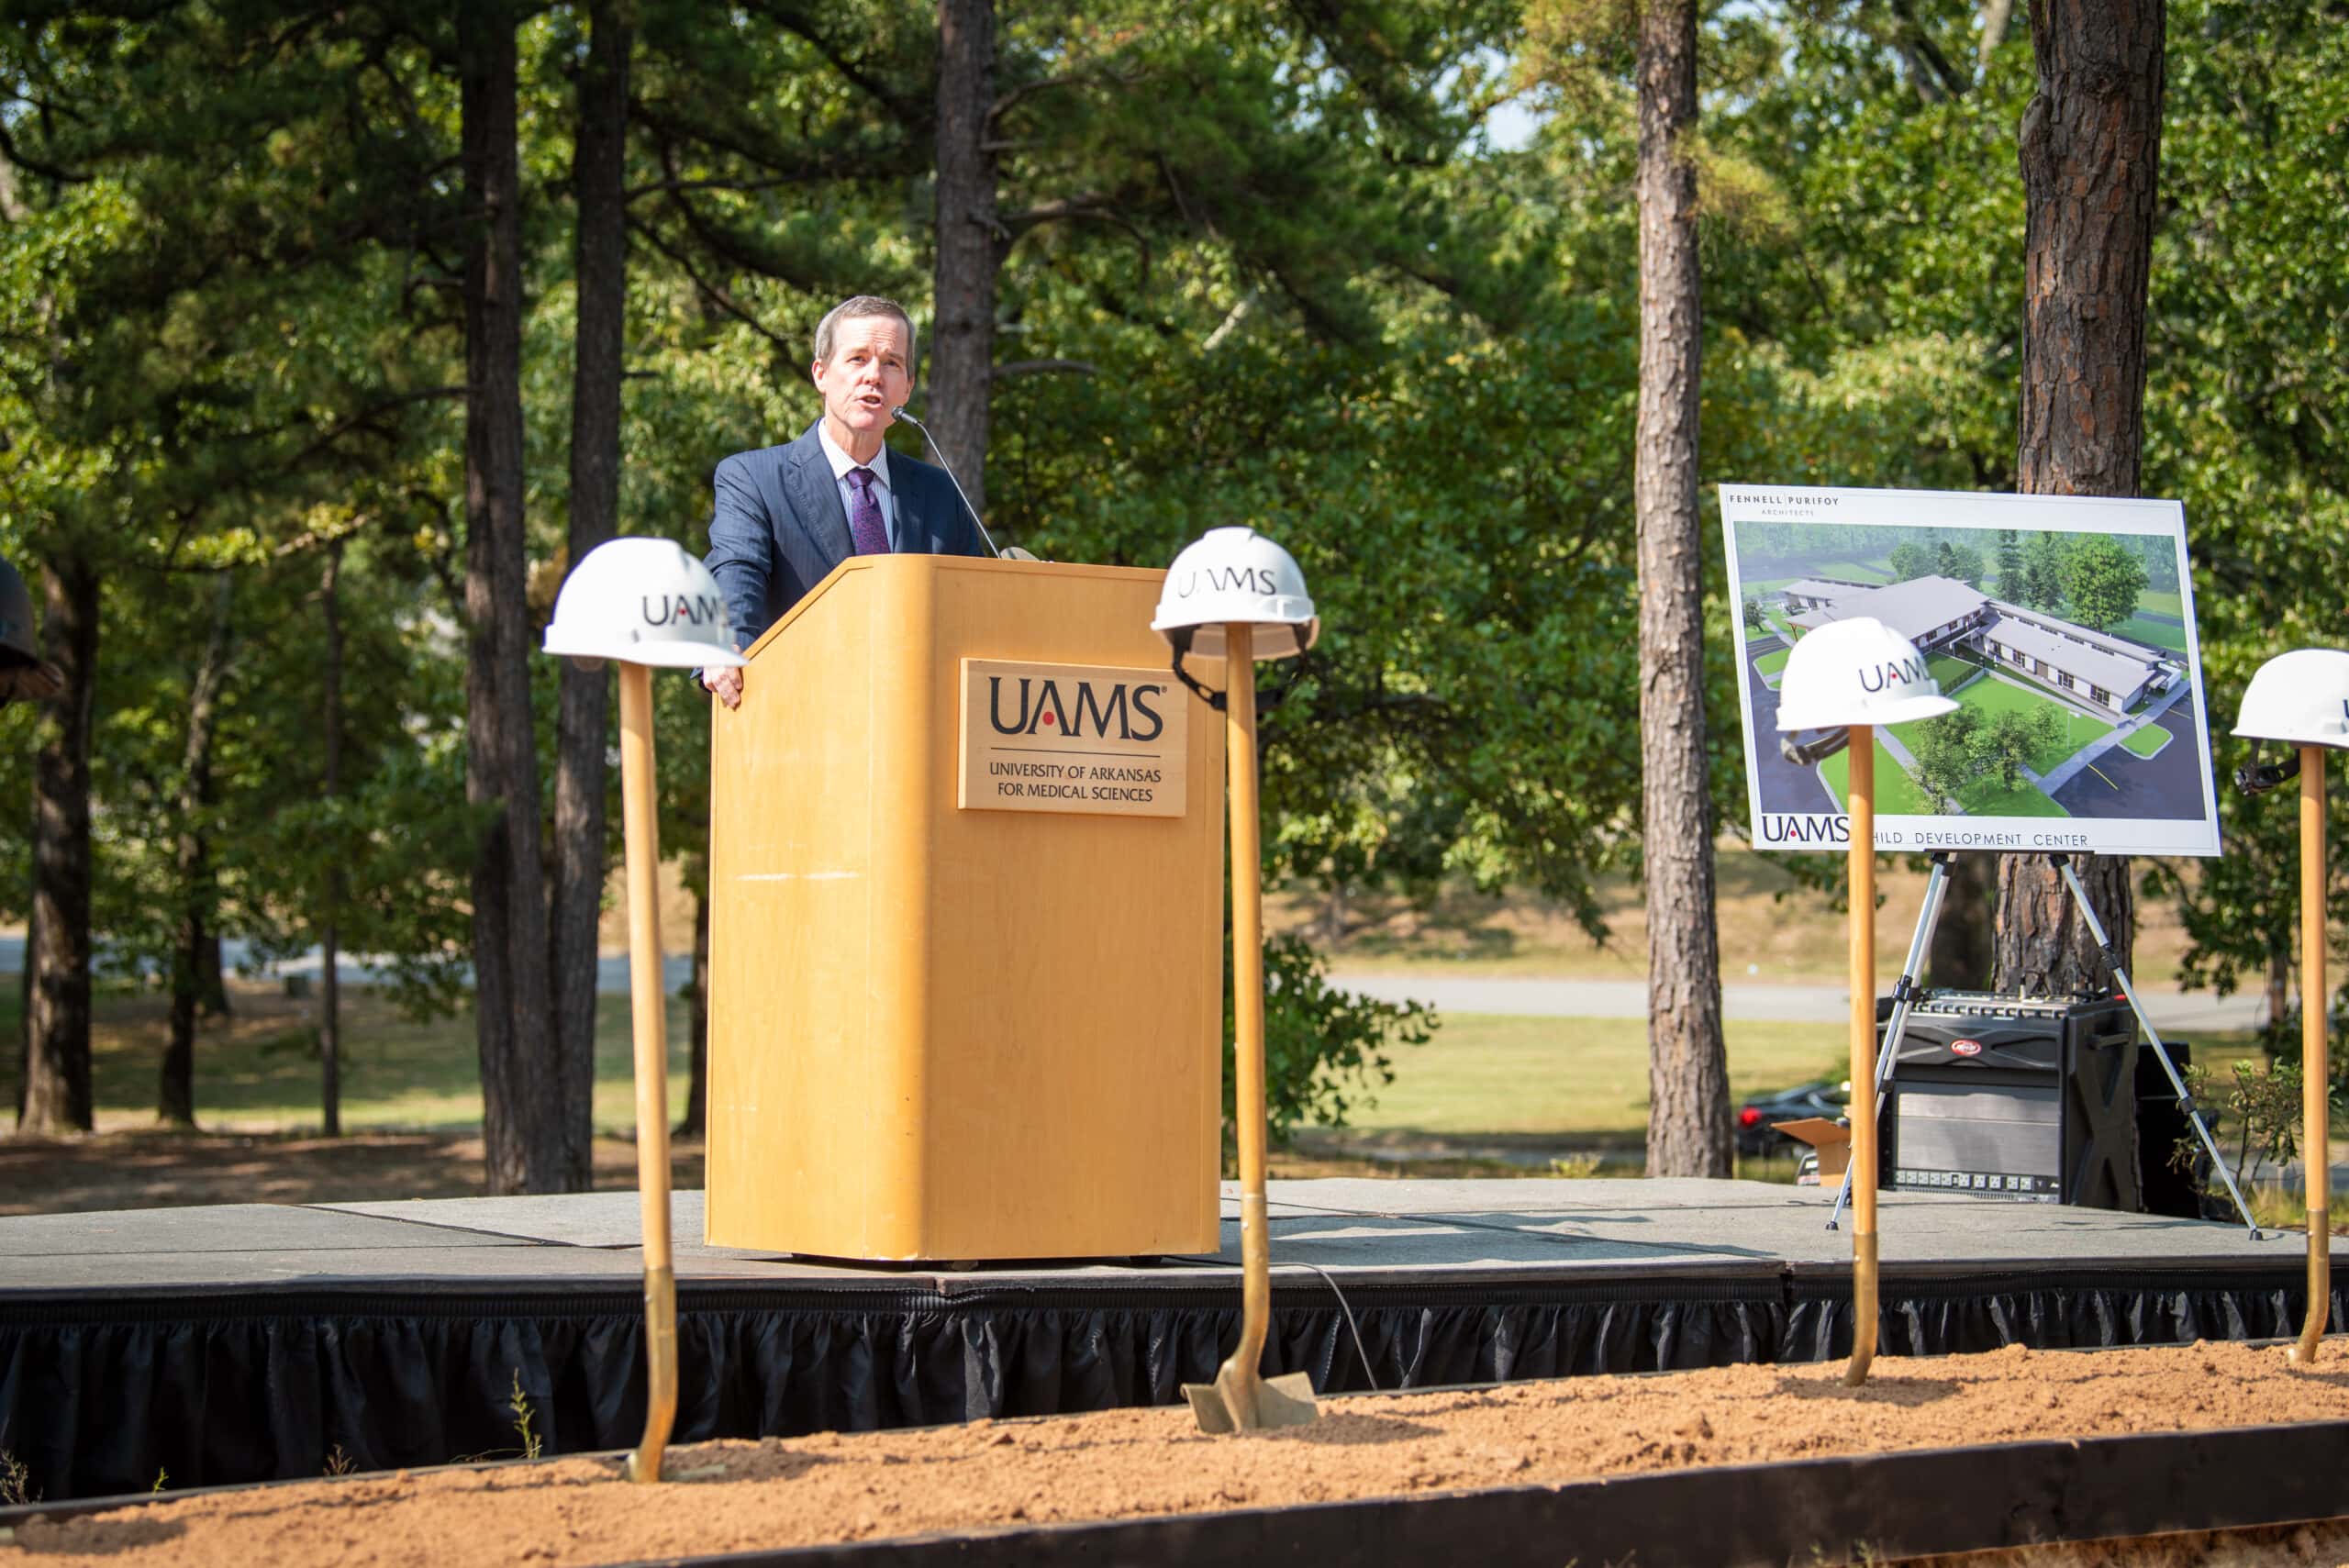 UAMS Breaks Floor on Little one Growth Middle